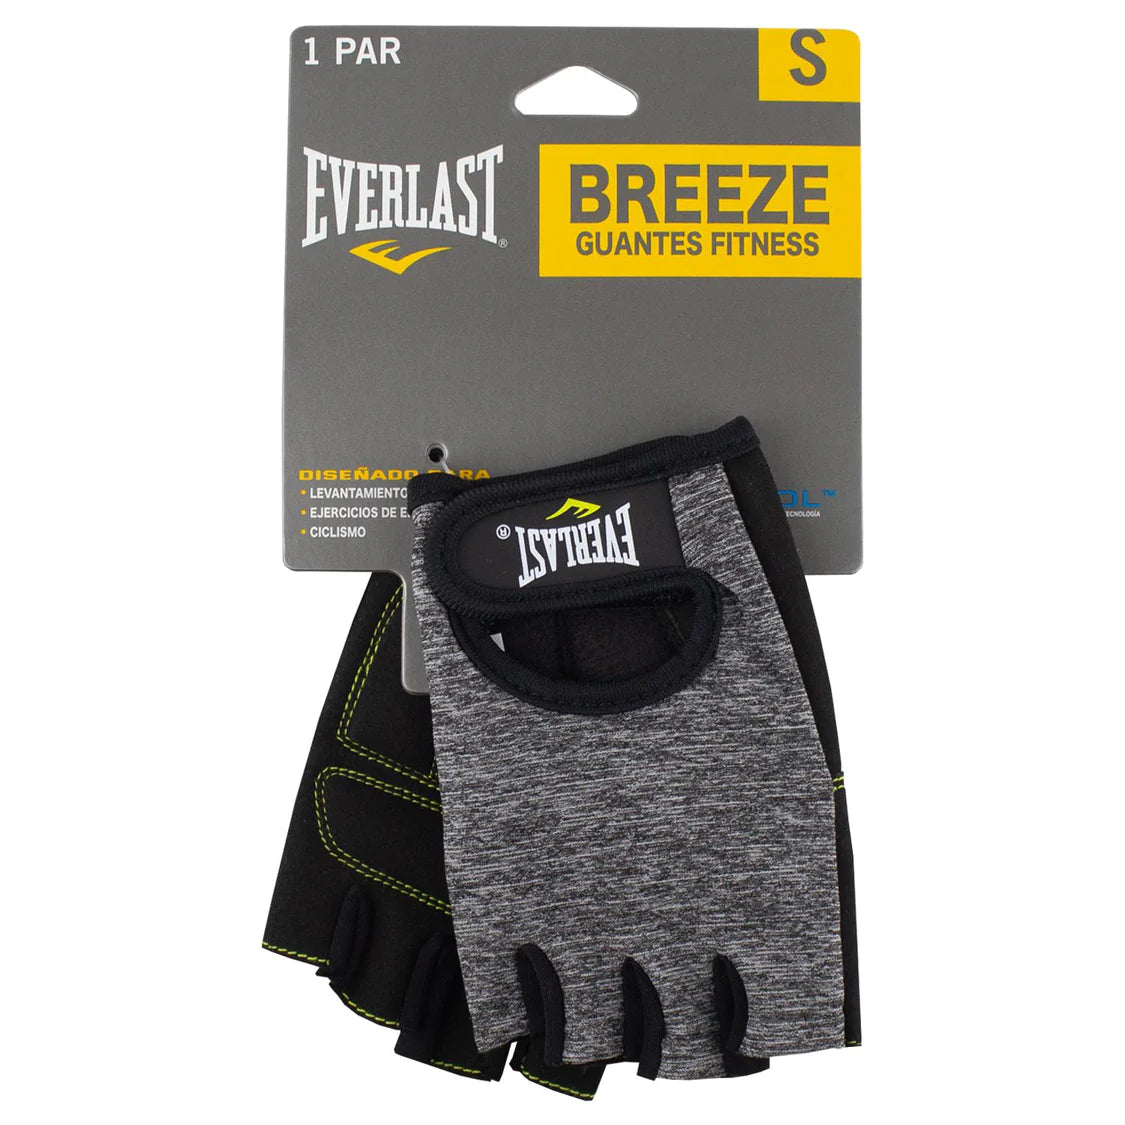 Guantes Fitness Everlast Breeze Gris/ Negro Mujer